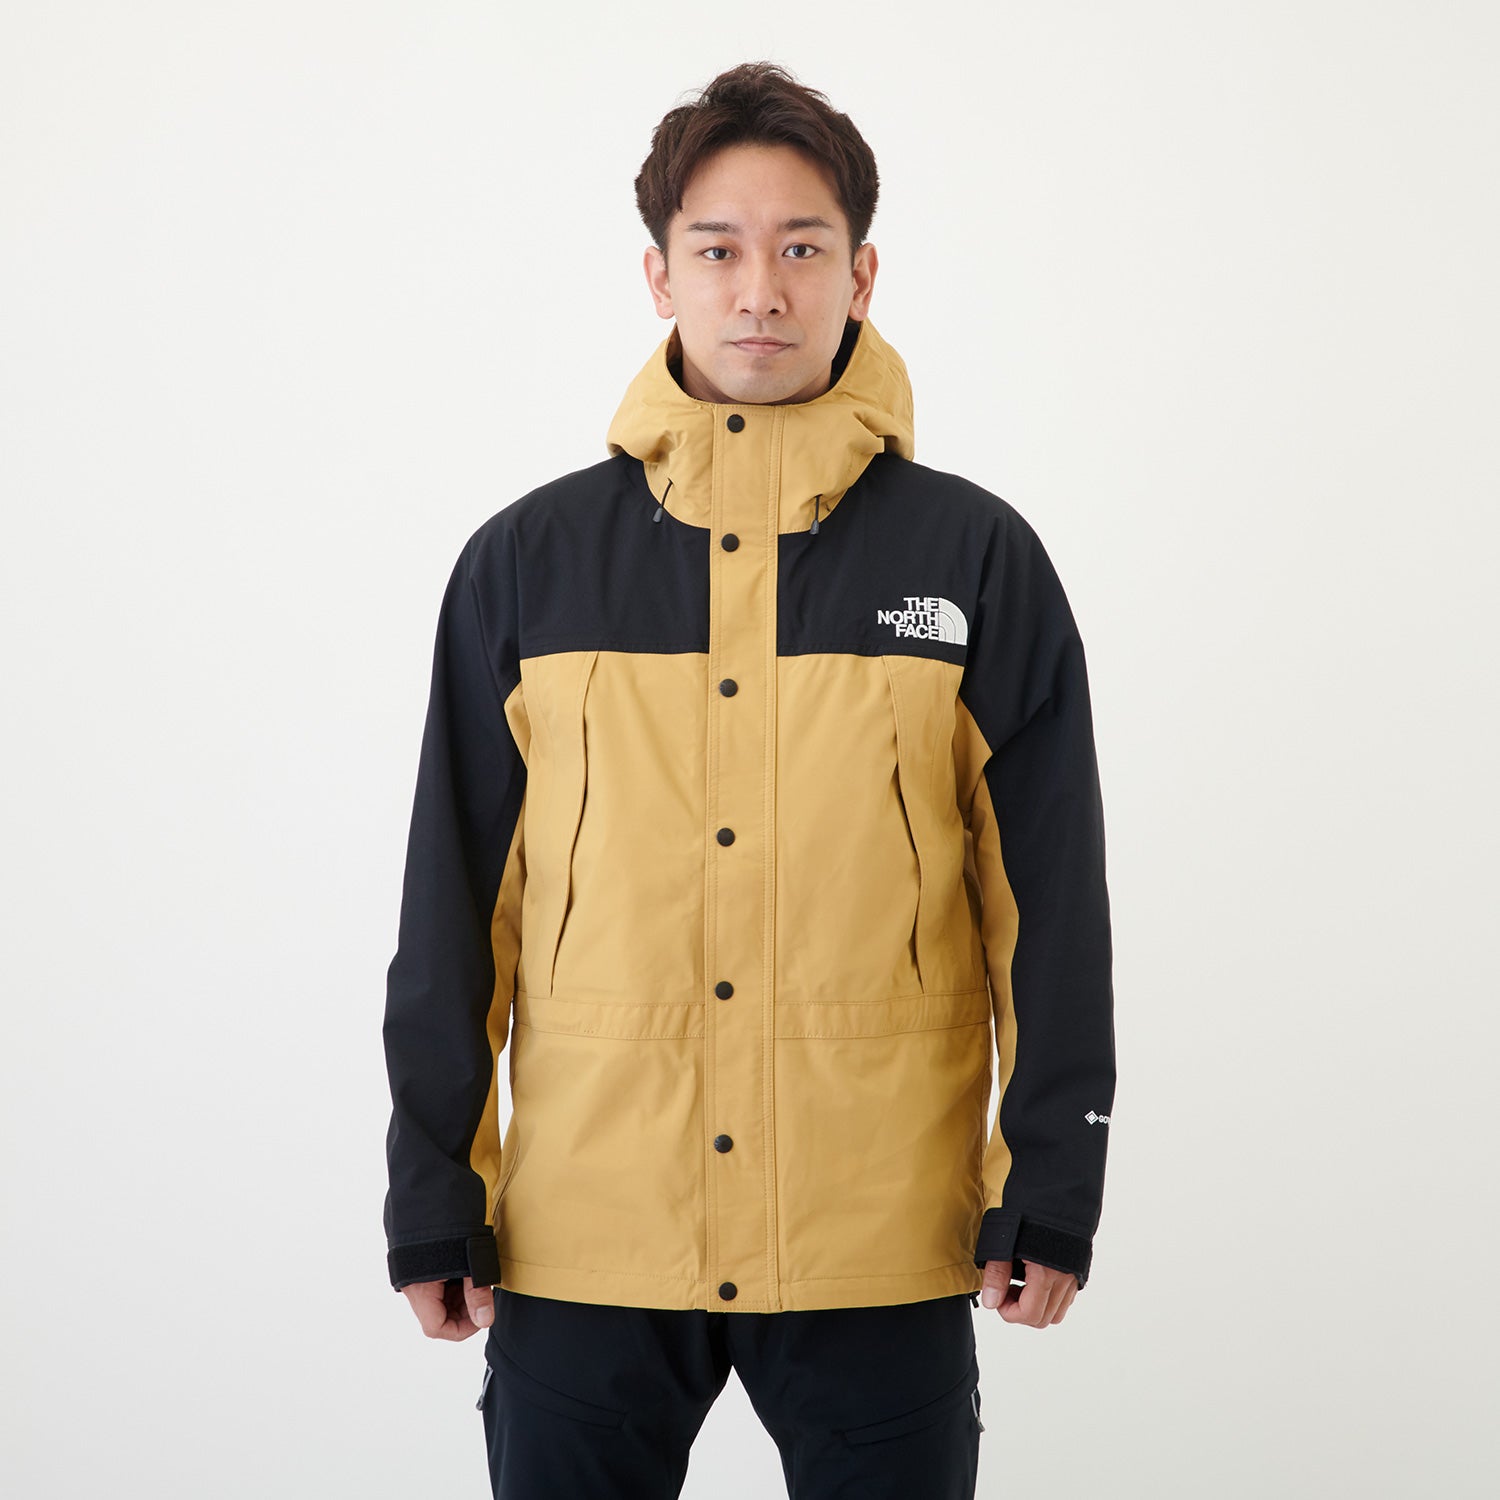 THE NORTH FACE MOUNTAIN JACKET黒XL